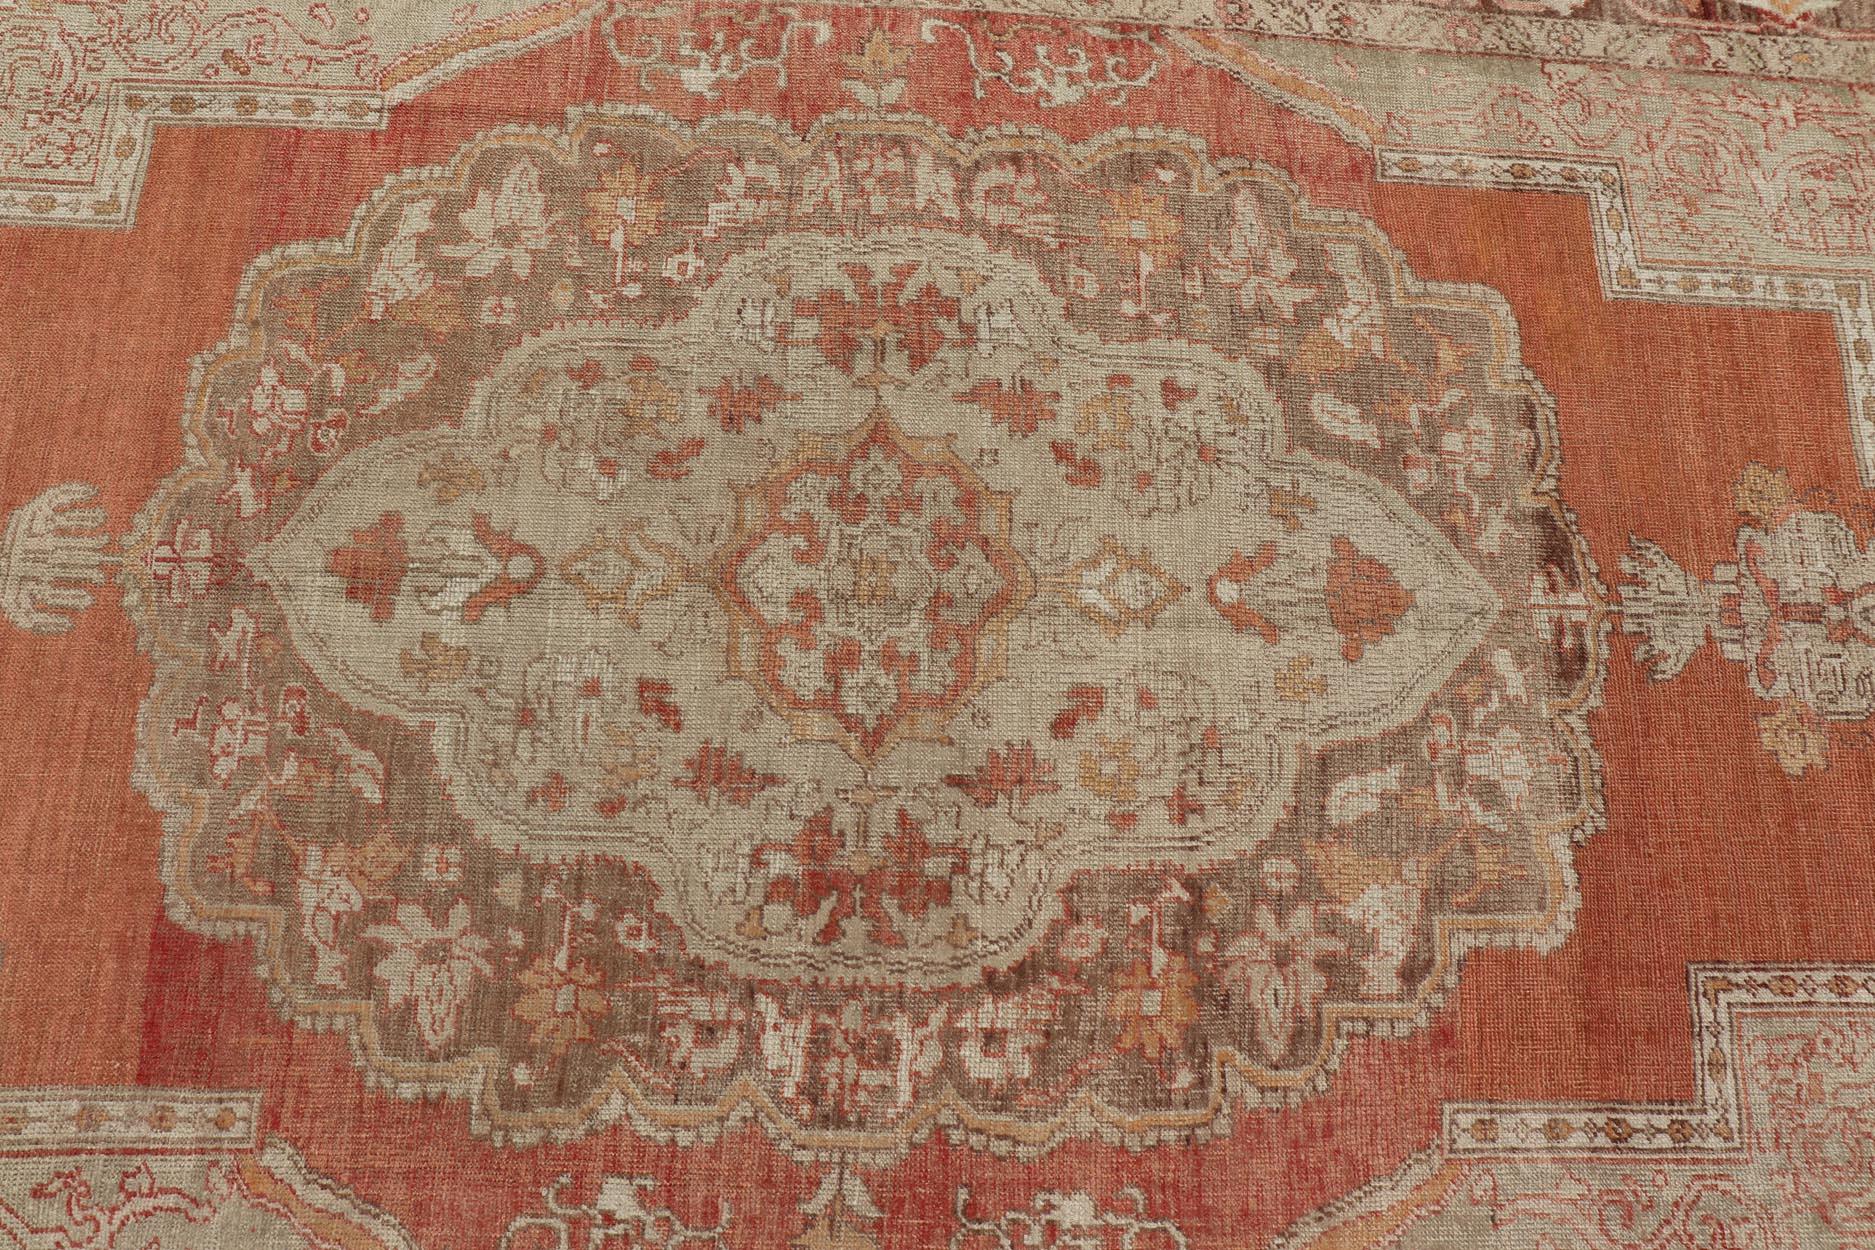  Antique Turkish Oushak Rug with Floral Medallion Burnt Orange and Cream  In Good Condition For Sale In Atlanta, GA